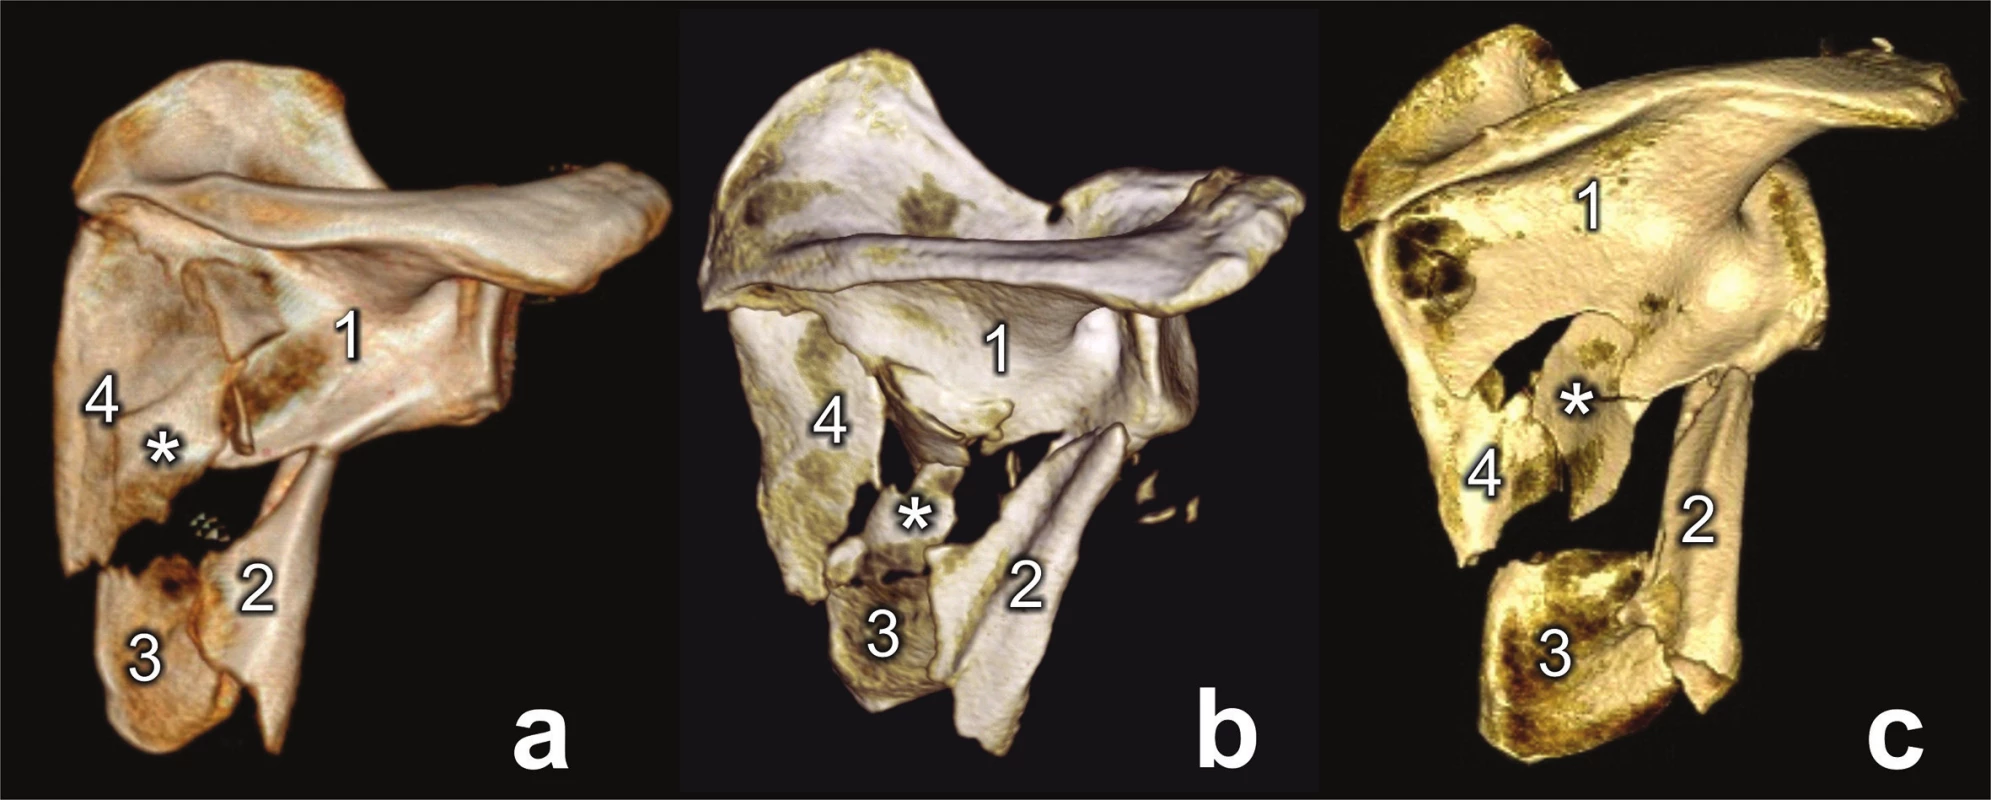 Types of comminuted fracture of lateral pillar (a, b, c)
1 – glenoid fragment, 2 – lateral border fragment, 3 – inferior angle fragment, 4 – medial border fragment, * - intercalary fragment.